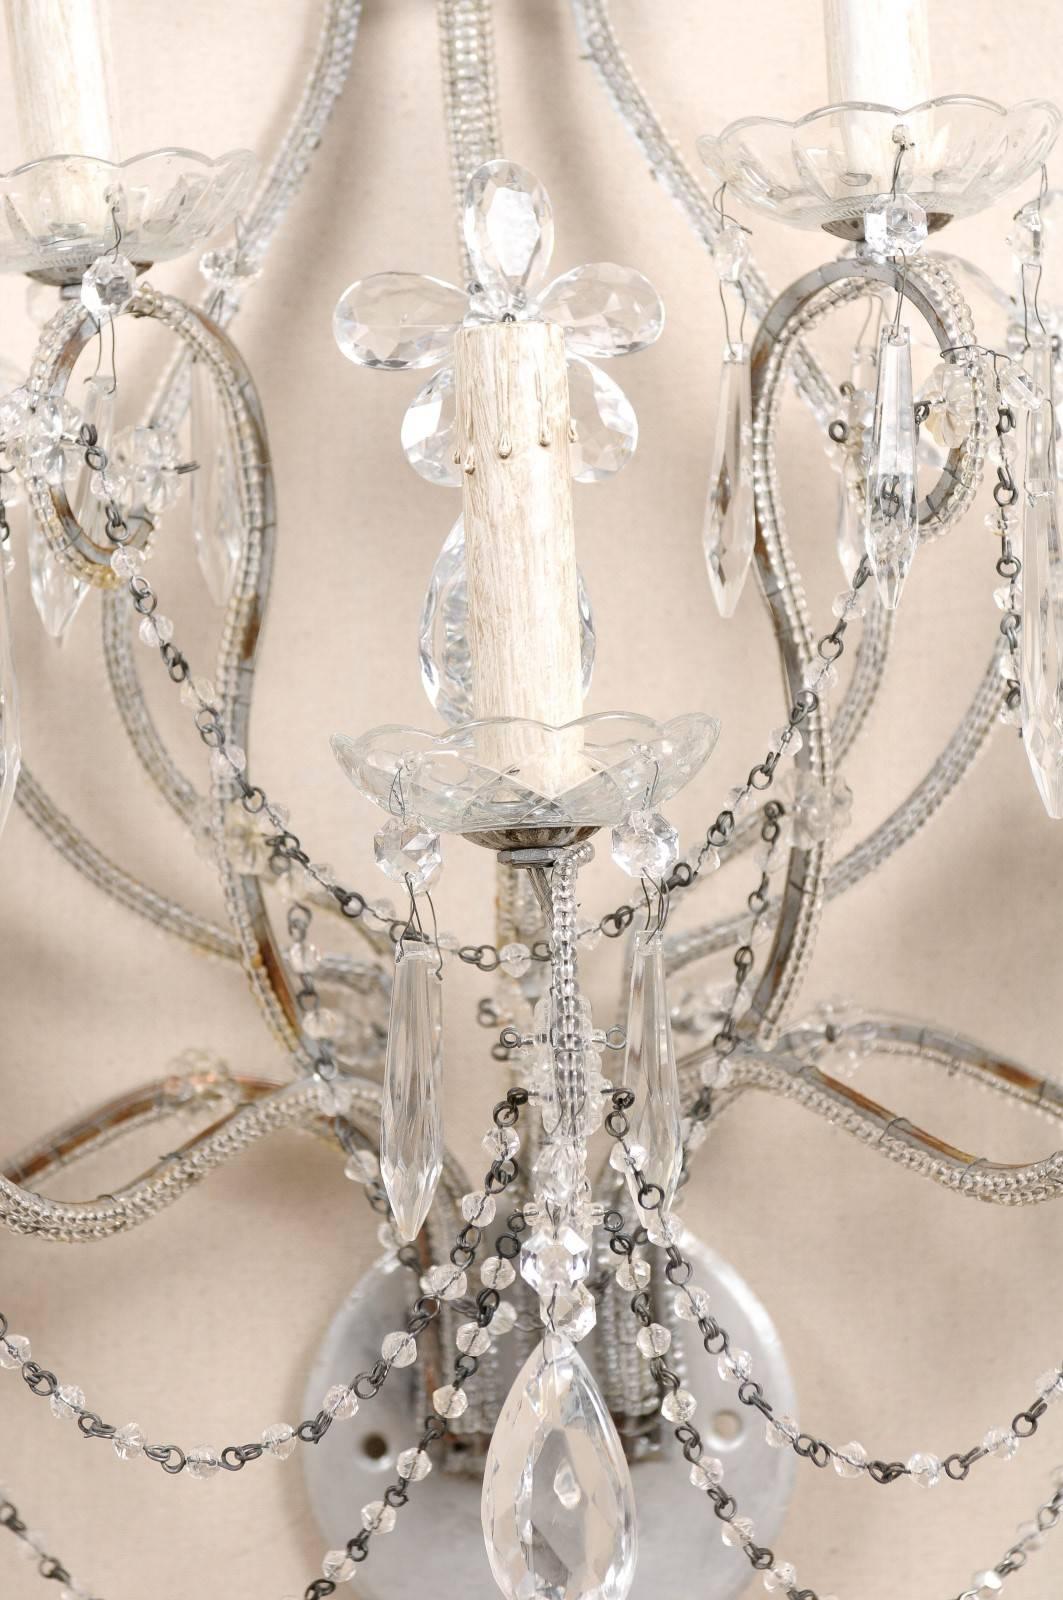 Pair of Crystal Five-Light Sconces from the Mid-20th Century with Flower Motifs 4